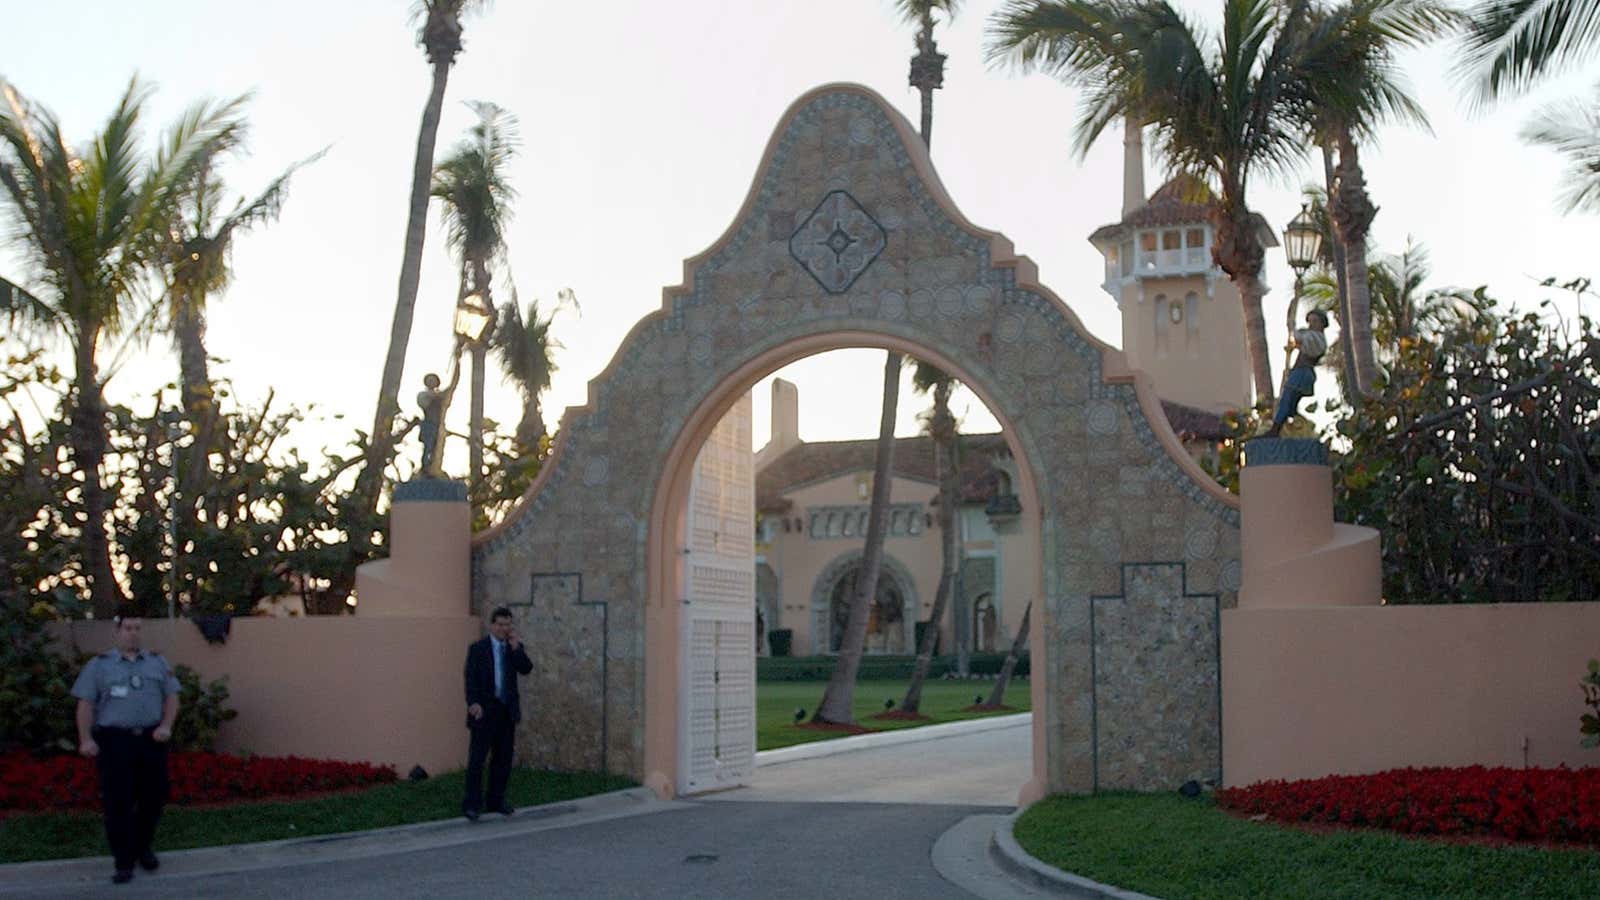 Welcome to Mar-a-Lago.